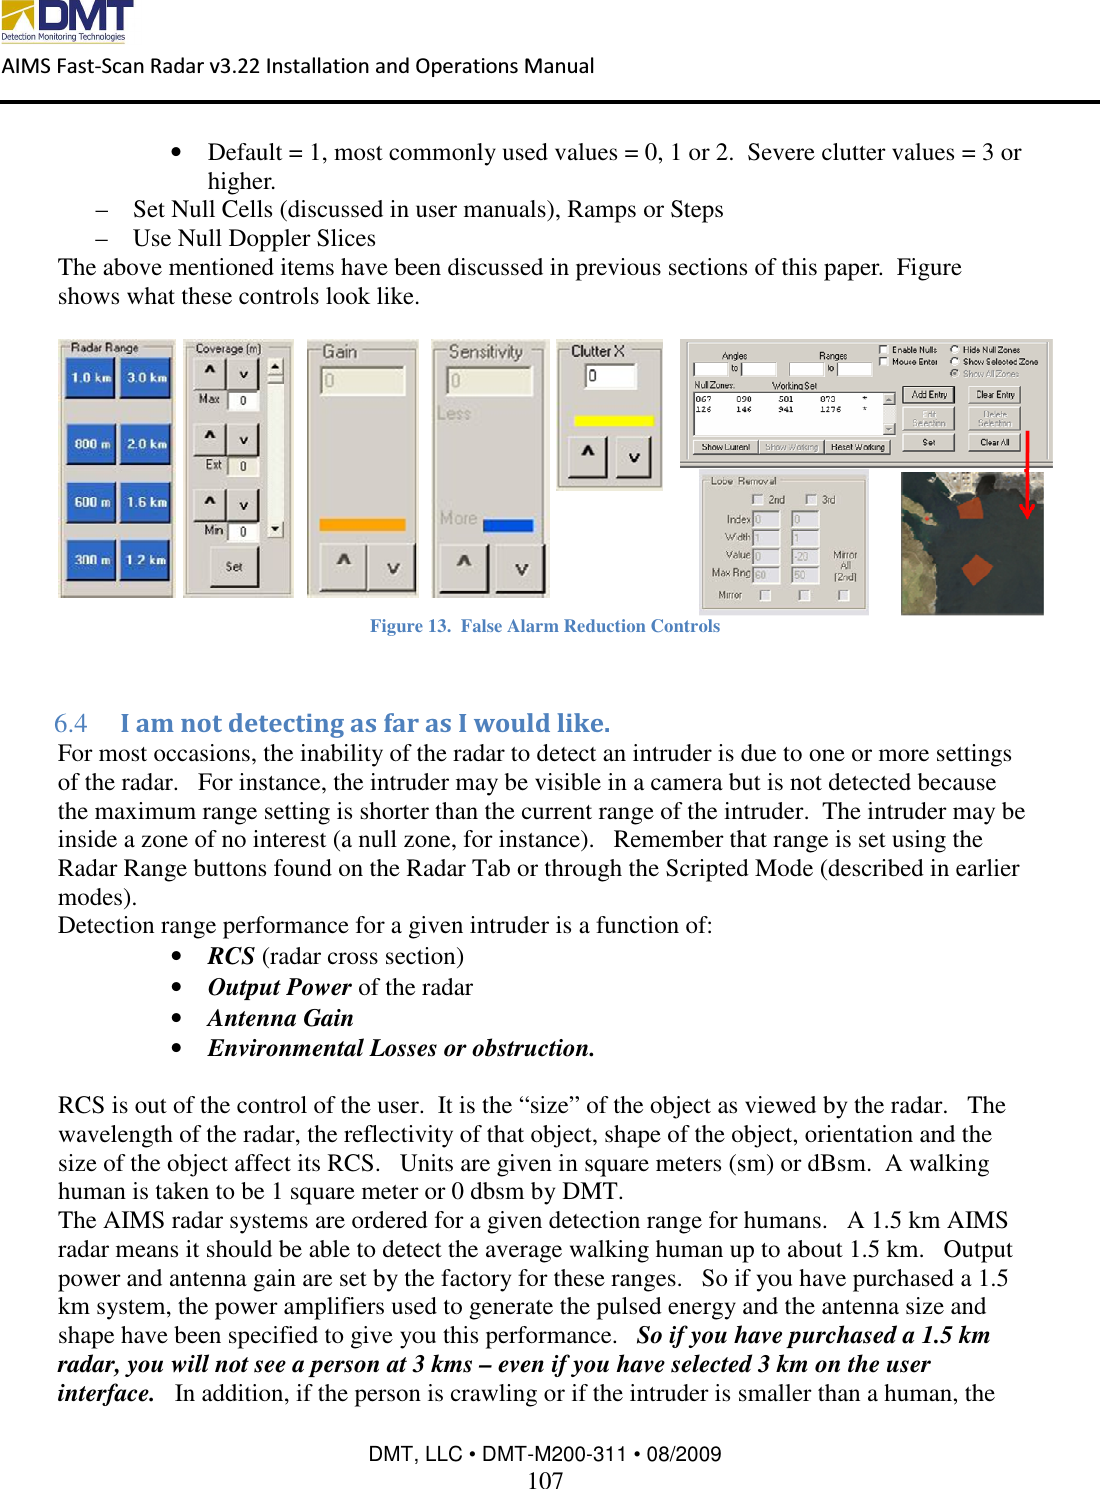  AIMS Fast-Scan Radar v3.22 Installation and Operations Manual    DMT, LLC • DMT-M200-311 • 08/2009 107  • Default = 1, most commonly used values = 0, 1 or 2.  Severe clutter values = 3 or higher. – Set Null Cells (discussed in user manuals), Ramps or Steps – Use Null Doppler Slices  The above mentioned items have been discussed in previous sections of this paper.  Figure  shows what these controls look like.   Figure 13.  False Alarm Reduction Controls  6.4  I am not detecting as far as I would like. For most occasions, the inability of the radar to detect an intruder is due to one or more settings of the radar.   For instance, the intruder may be visible in a camera but is not detected because the maximum range setting is shorter than the current range of the intruder.  The intruder may be inside a zone of no interest (a null zone, for instance).   Remember that range is set using the Radar Range buttons found on the Radar Tab or through the Scripted Mode (described in earlier modes). Detection range performance for a given intruder is a function of: • RCS (radar cross section) • Output Power of the radar • Antenna Gain • Environmental Losses or obstruction.  RCS is out of the control of the user.  It is the “size” of the object as viewed by the radar.   The wavelength of the radar, the reflectivity of that object, shape of the object, orientation and the size of the object affect its RCS.   Units are given in square meters (sm) or dBsm.  A walking human is taken to be 1 square meter or 0 dbsm by DMT. The AIMS radar systems are ordered for a given detection range for humans.   A 1.5 km AIMS radar means it should be able to detect the average walking human up to about 1.5 km.   Output power and antenna gain are set by the factory for these ranges.   So if you have purchased a 1.5 km system, the power amplifiers used to generate the pulsed energy and the antenna size and shape have been specified to give you this performance.   So if you have purchased a 1.5 km radar, you will not see a person at 3 kms – even if you have selected 3 km on the user interface.   In addition, if the person is crawling or if the intruder is smaller than a human, the 